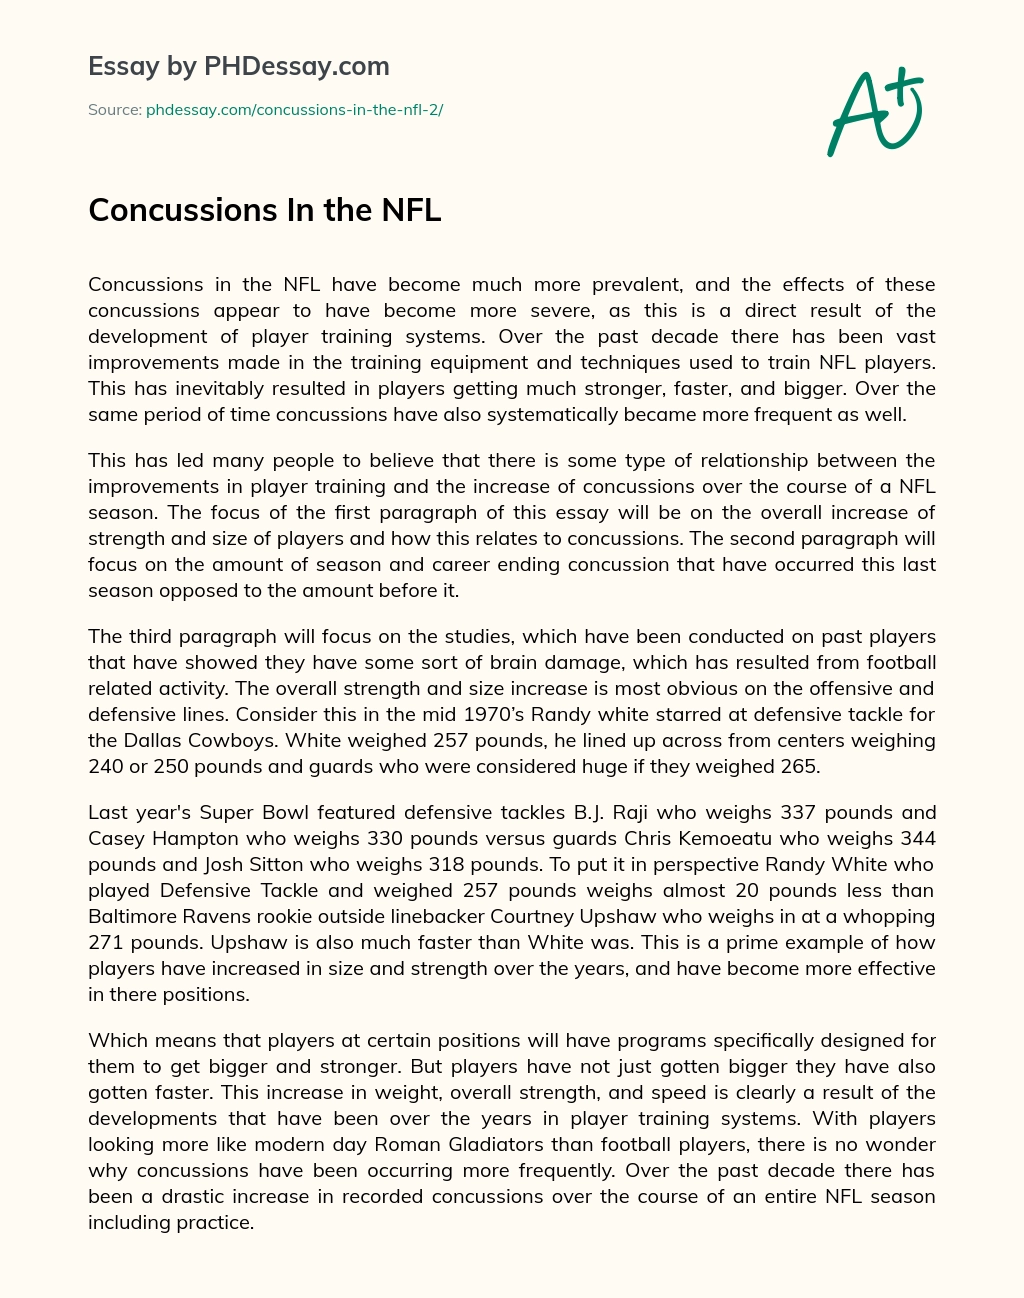 Concussions In the NFL essay